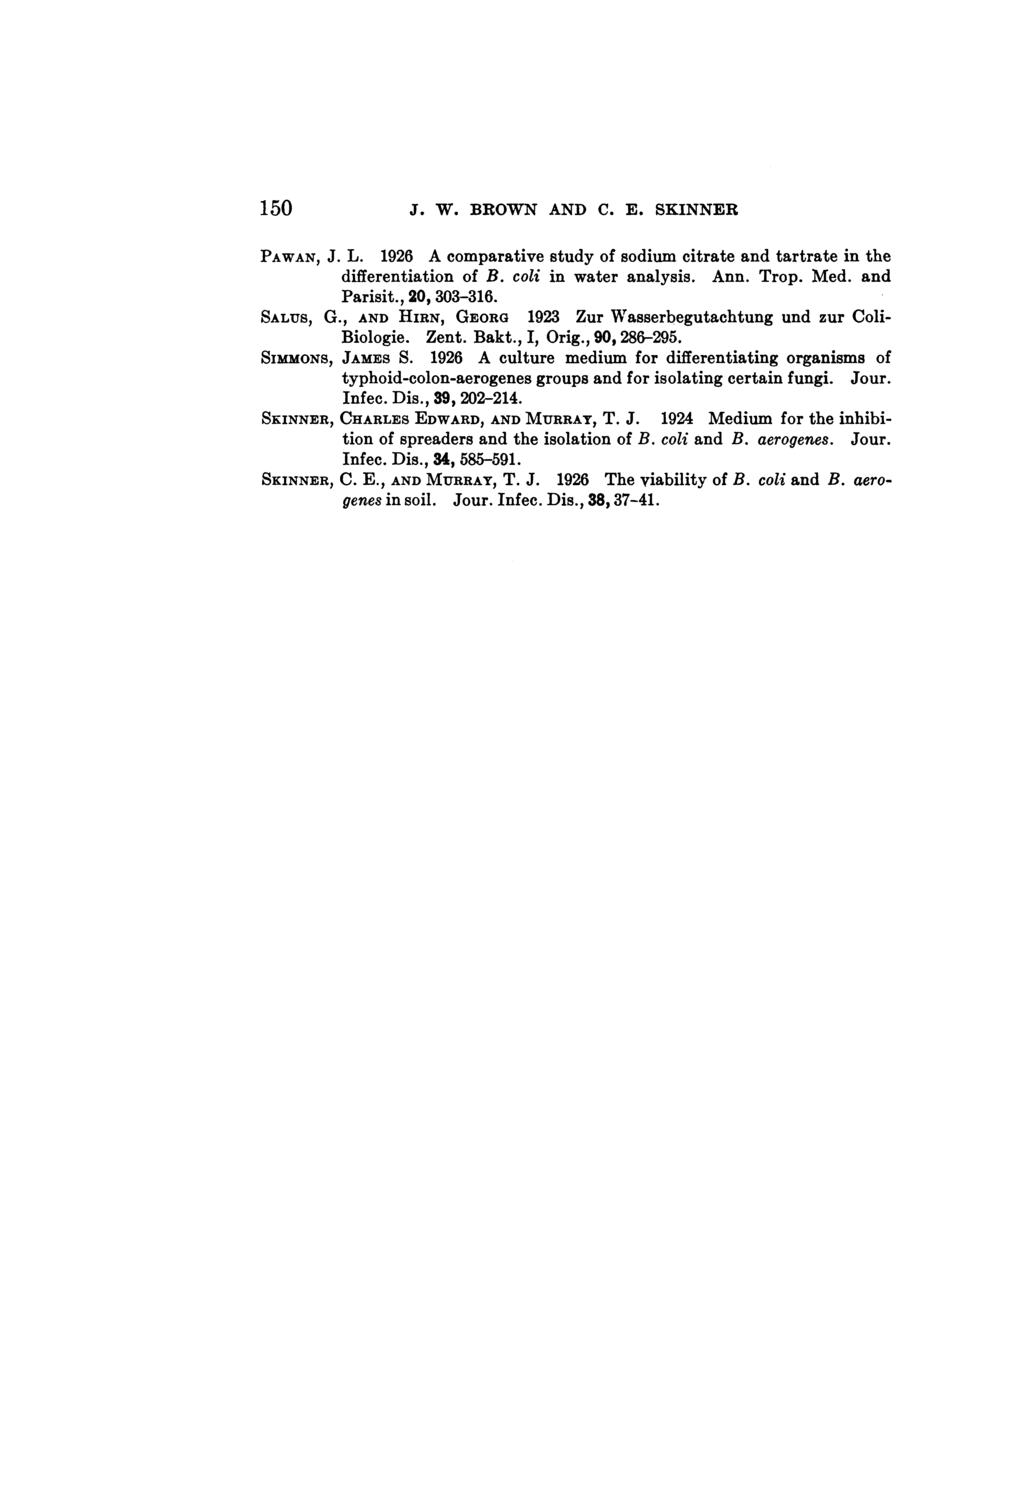 150 J. W. BROWN AND C. E. SKINNER PAWAN, J. L. 1926 A comparative study of sodium citrate and tartrate in the differentiation of B. coli in water analysis. Ann. Trop. Med. and Parisit., 20, 303-316.